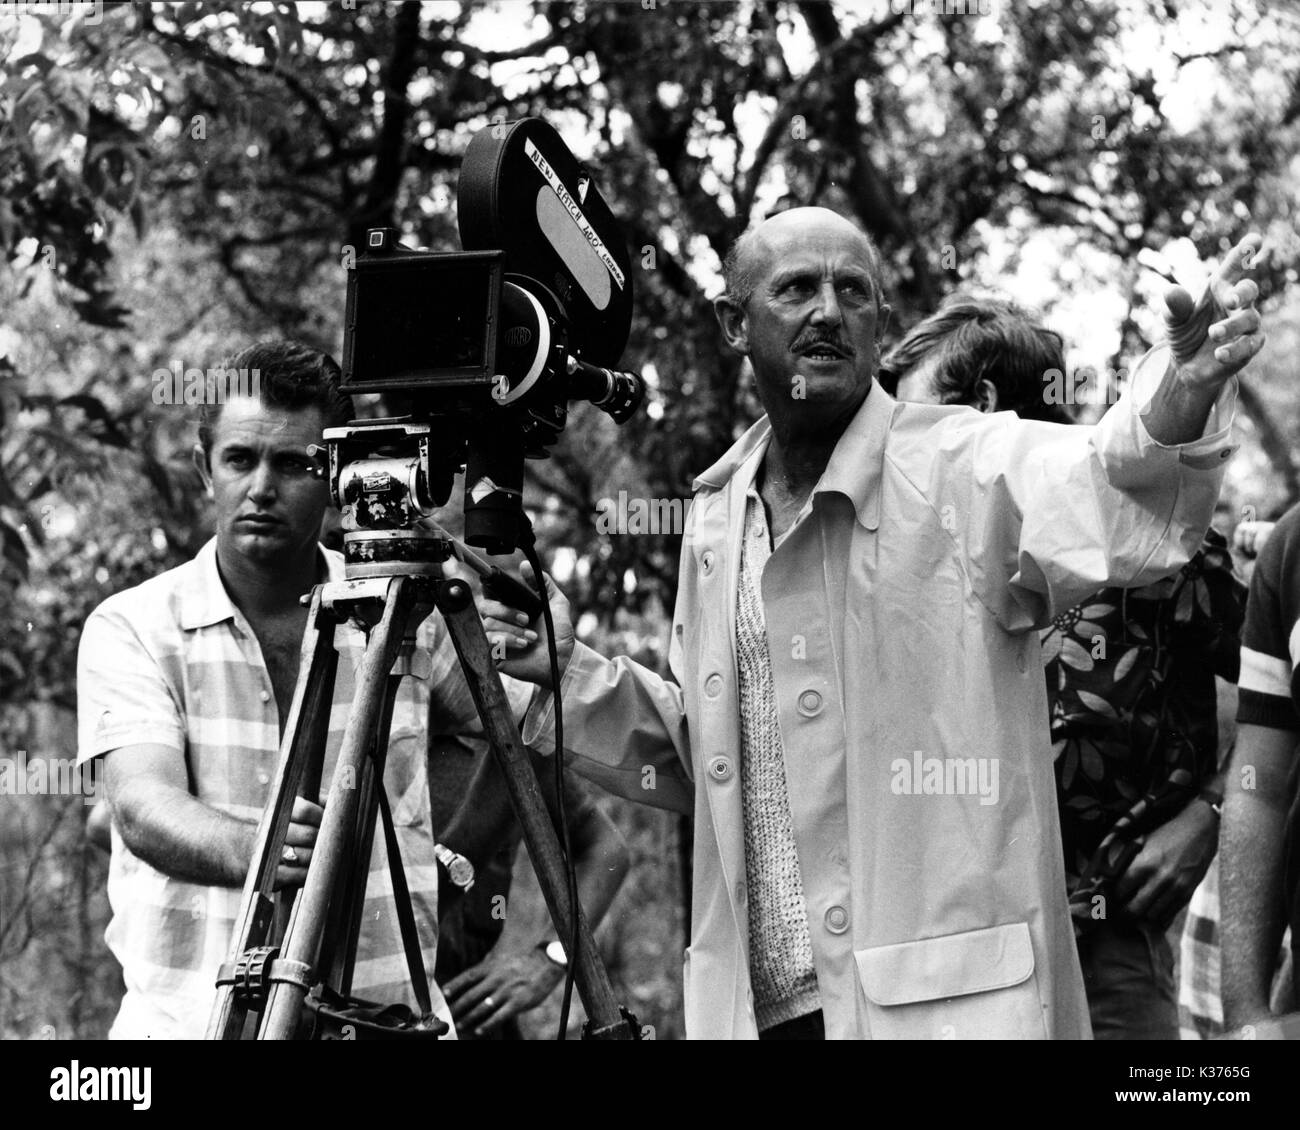 DIRECTOR MICHAEL POWELL IN AUSTRALIA ON LOCATION FOR AGE OF CONSENT {WITH POSSIBLY CINEMATOGRAPHER HANNES STAUDINGER} IN 1969 Stock Photo